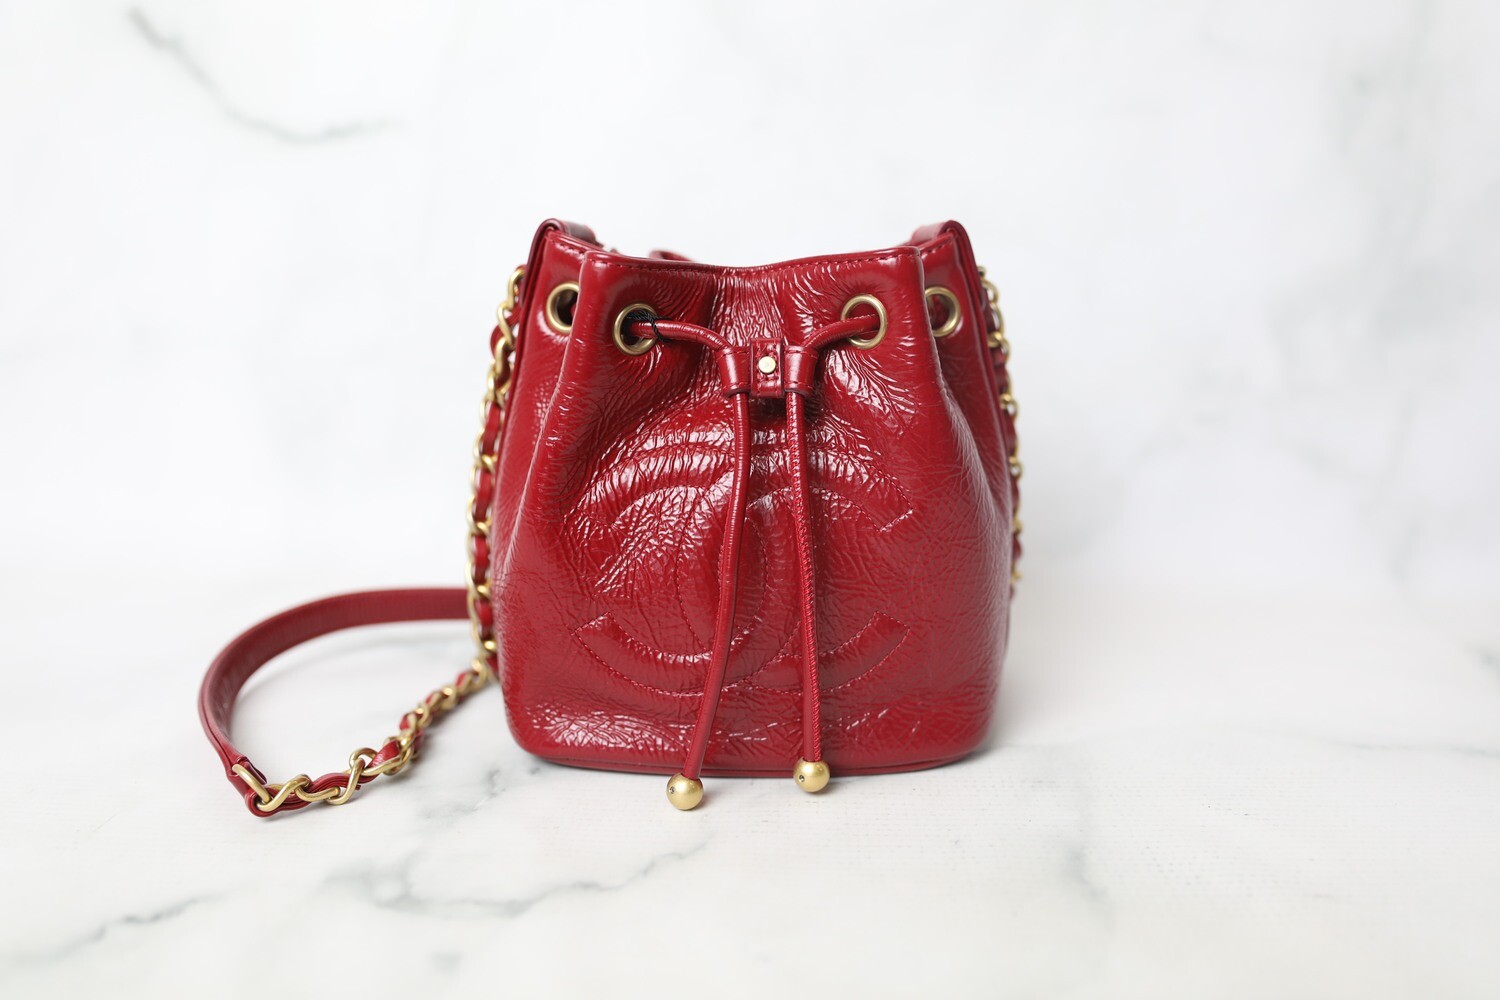 Chanel Bucket Bag, Red Shiny Calfskin with Gold Hardware, New in Box WA001